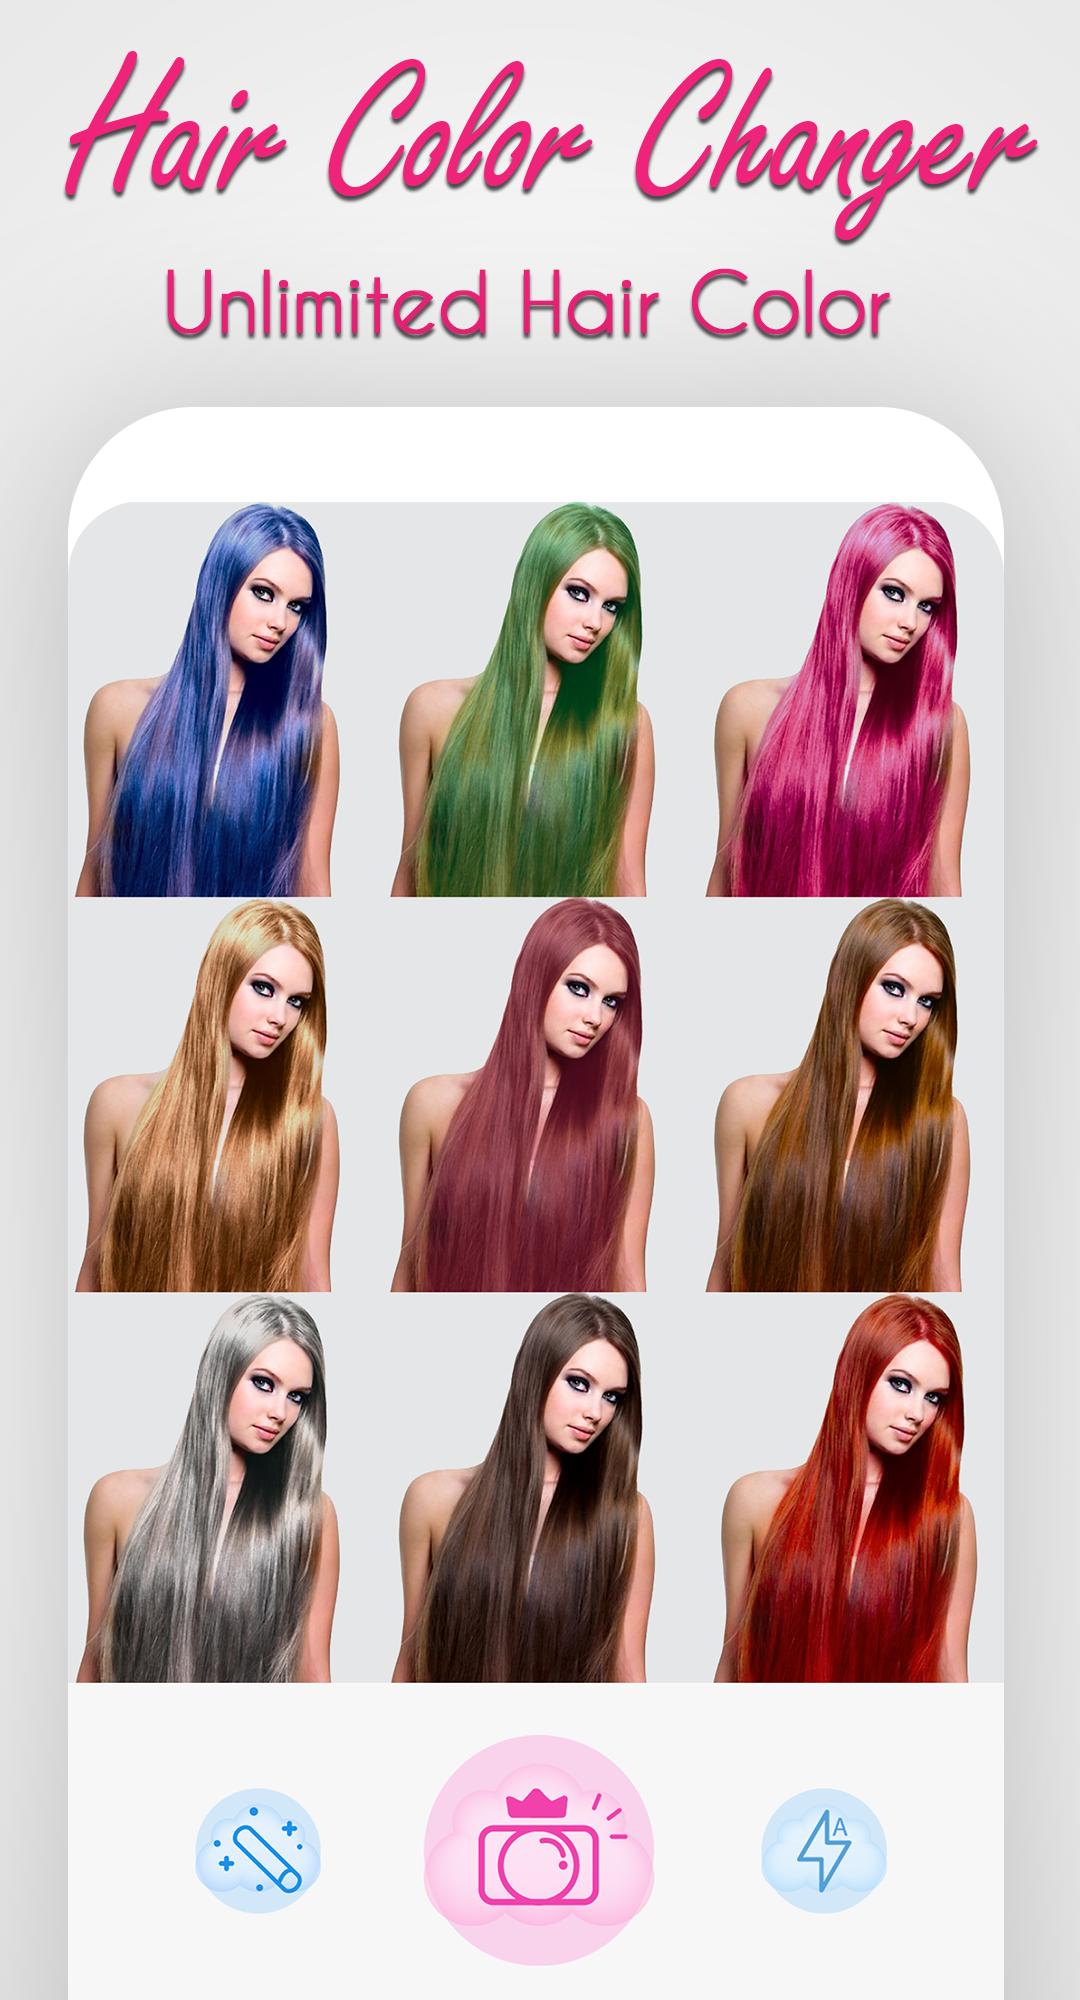 Hair Dyes Photo Editor Hair Color Changer For Android Apk Download - pink hair rambut roblox free girl